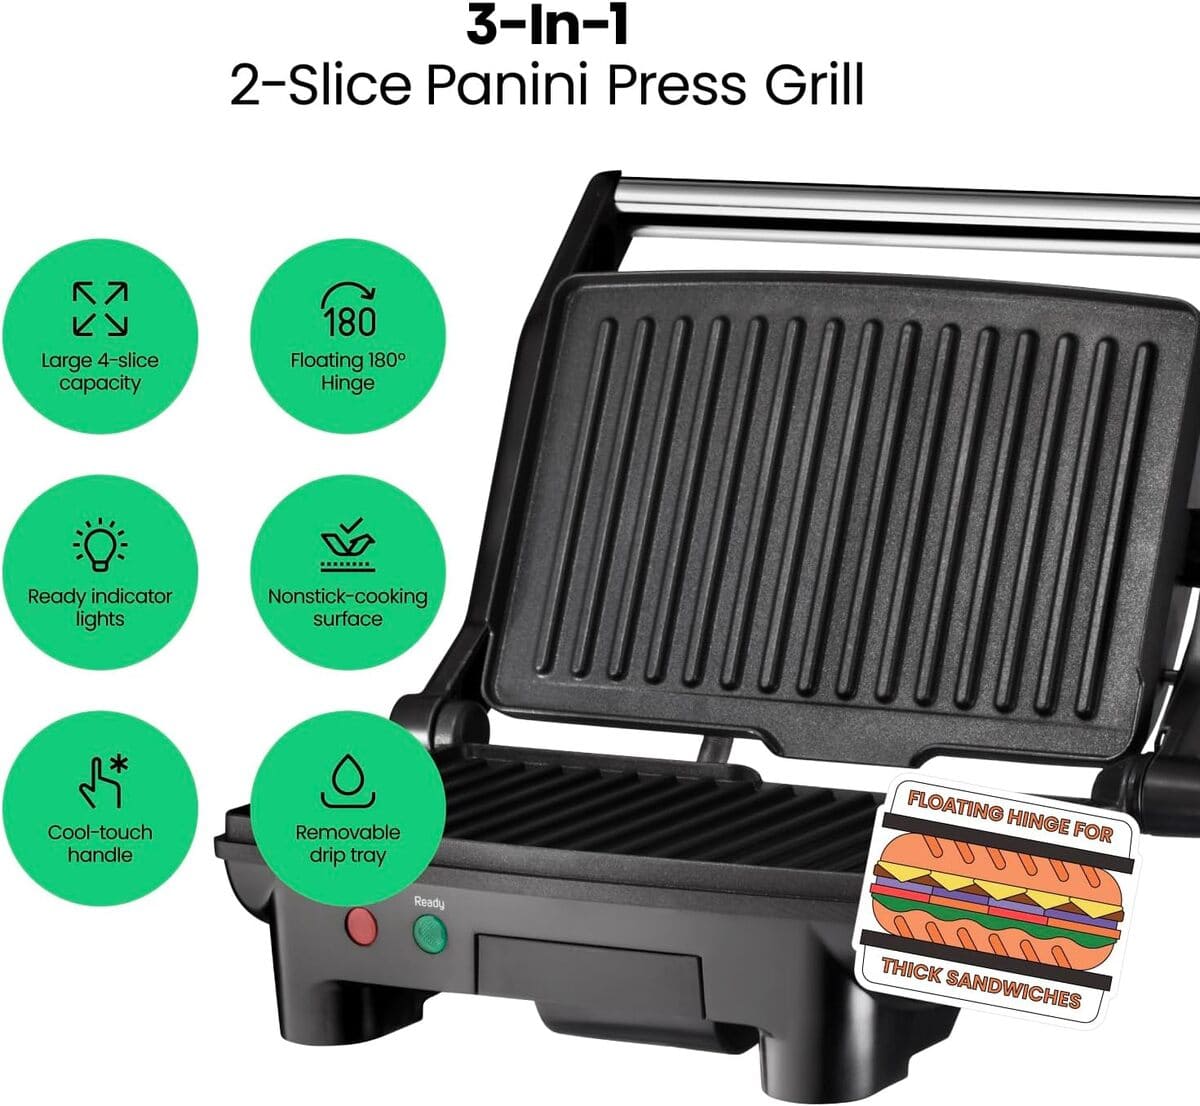 Chefman Electric Panini Press Grill and Gourmet Sandwich Maker from Amazon